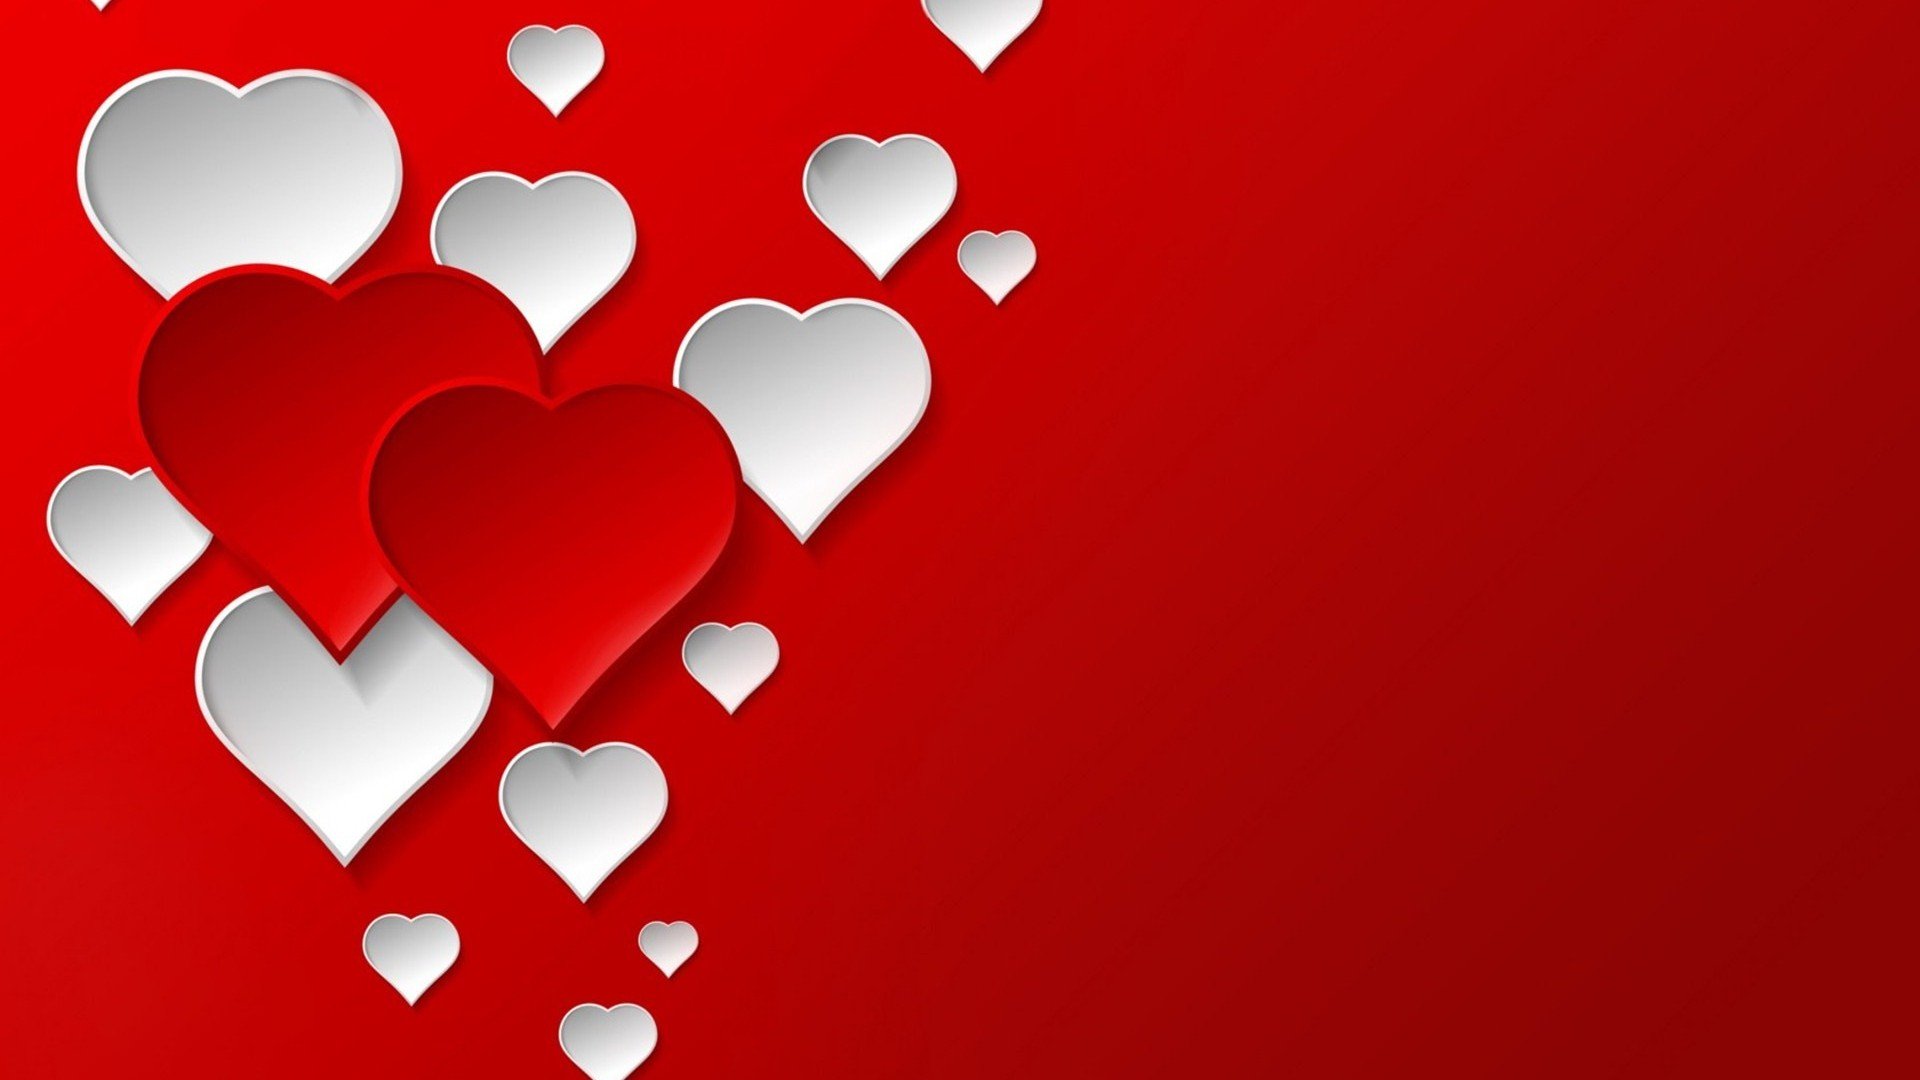 Valentines day mood love holiday valentine heart wallpapers hd desktop and mobile backgrounds